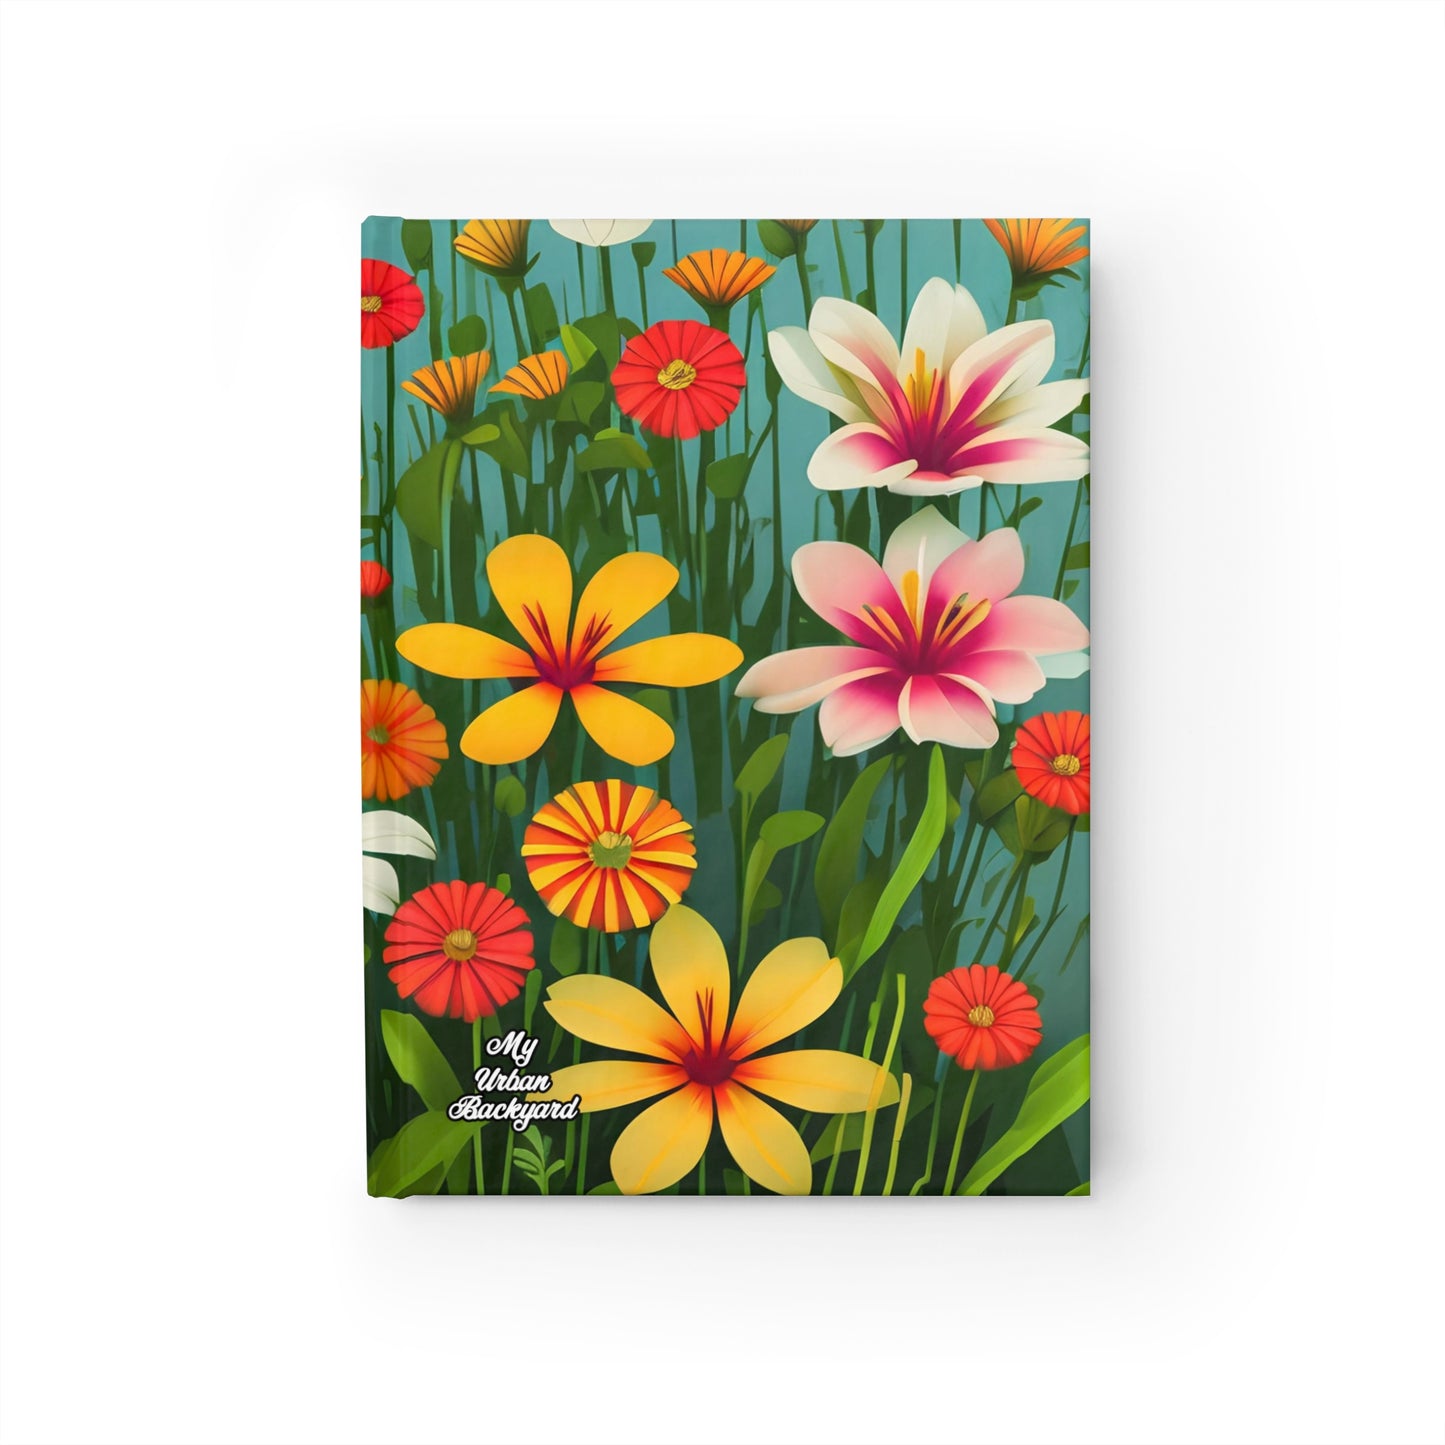 Hardcover Writing Journal with 128 ruled line pages - Wildflowers